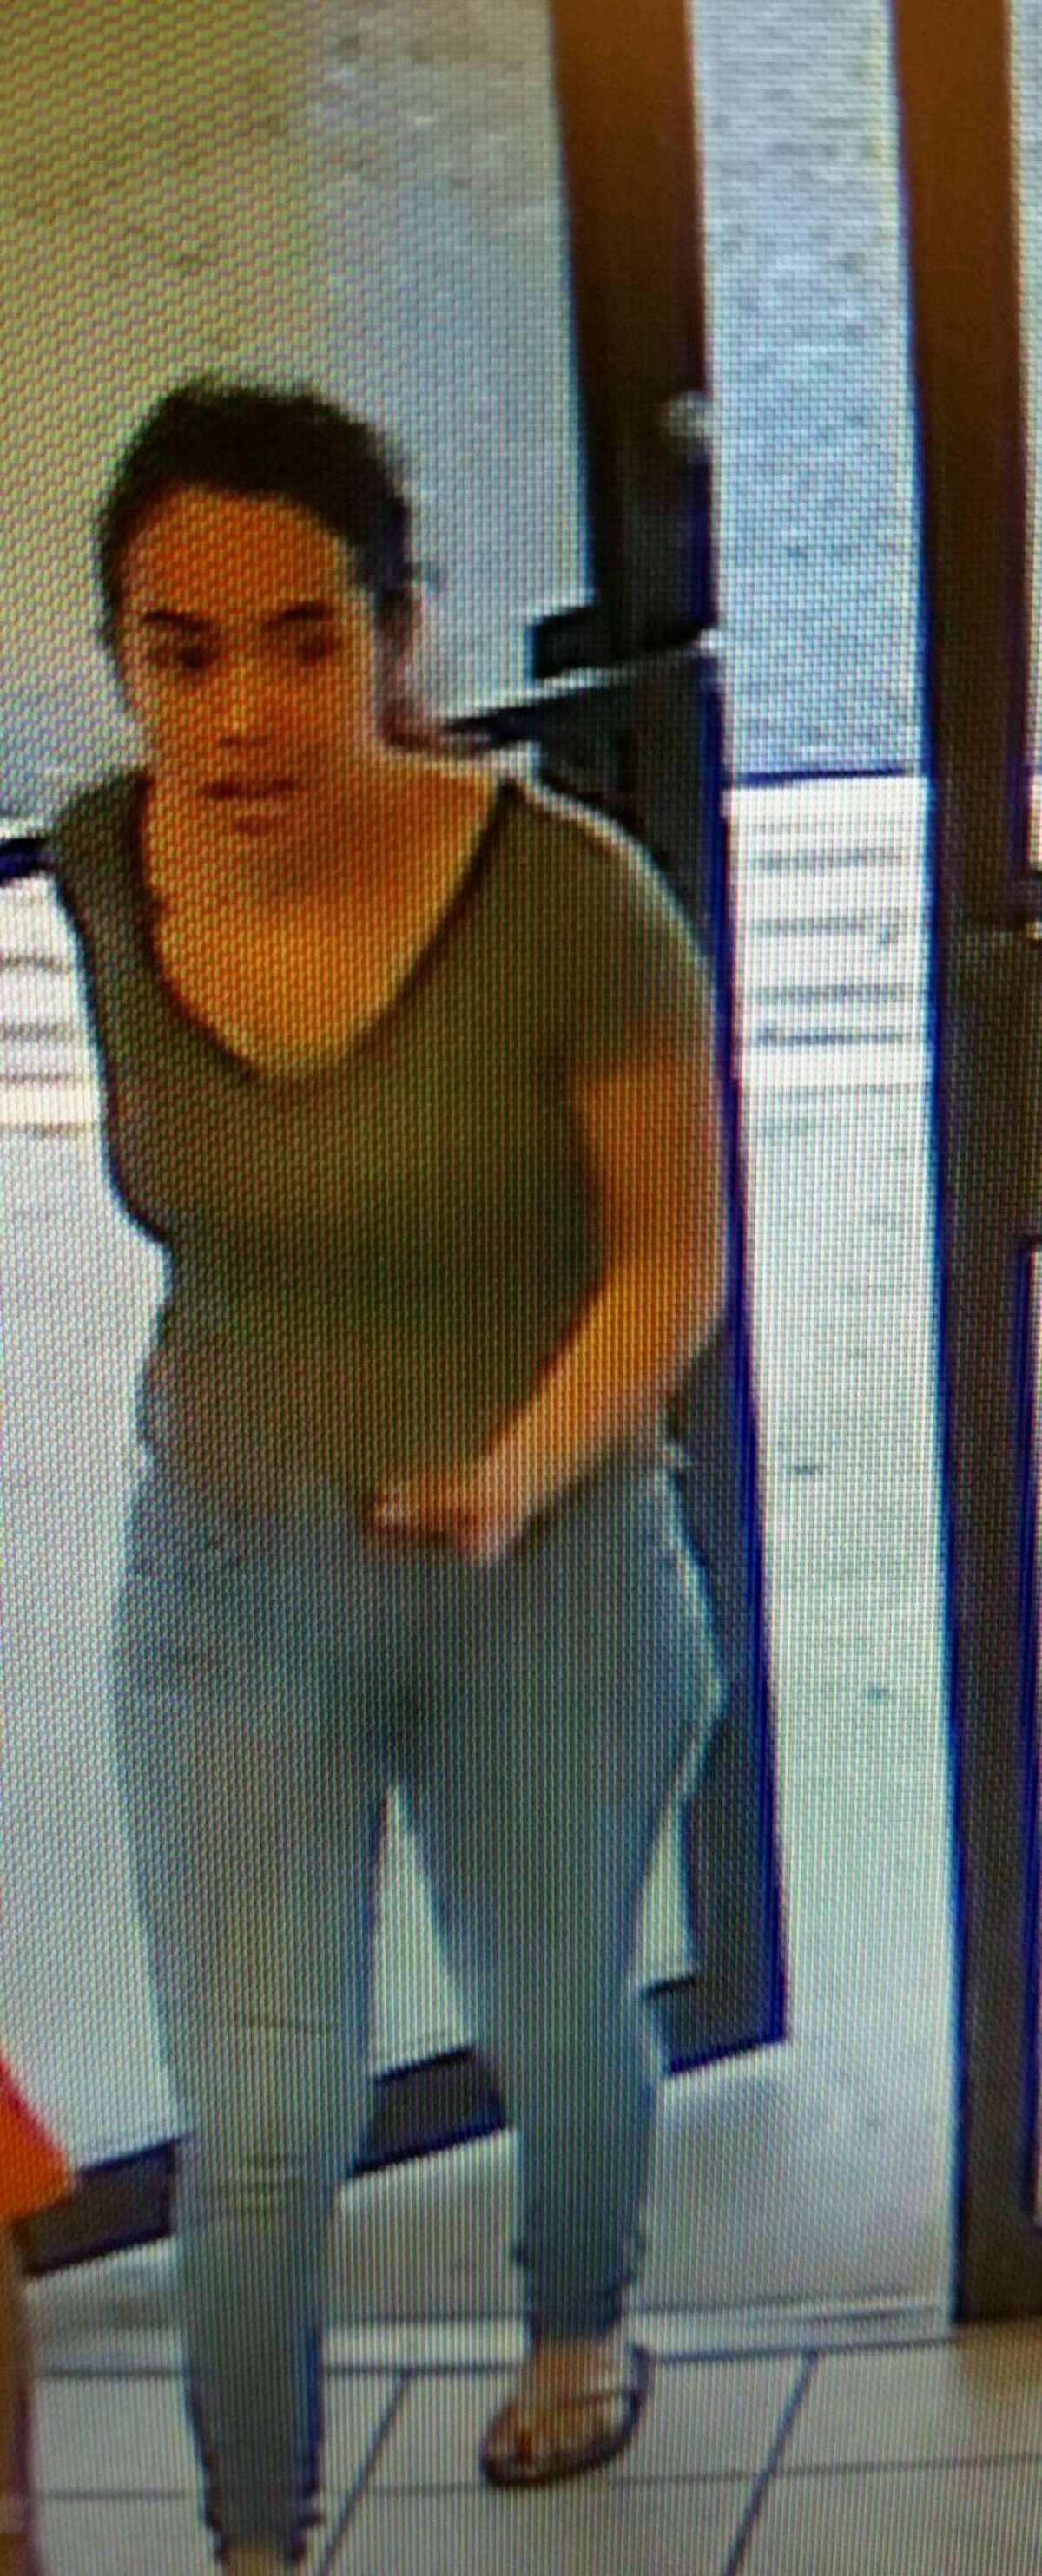 Laredo detectives are currently highlighting several females alleged of stealing cologne for the purposes of identification.